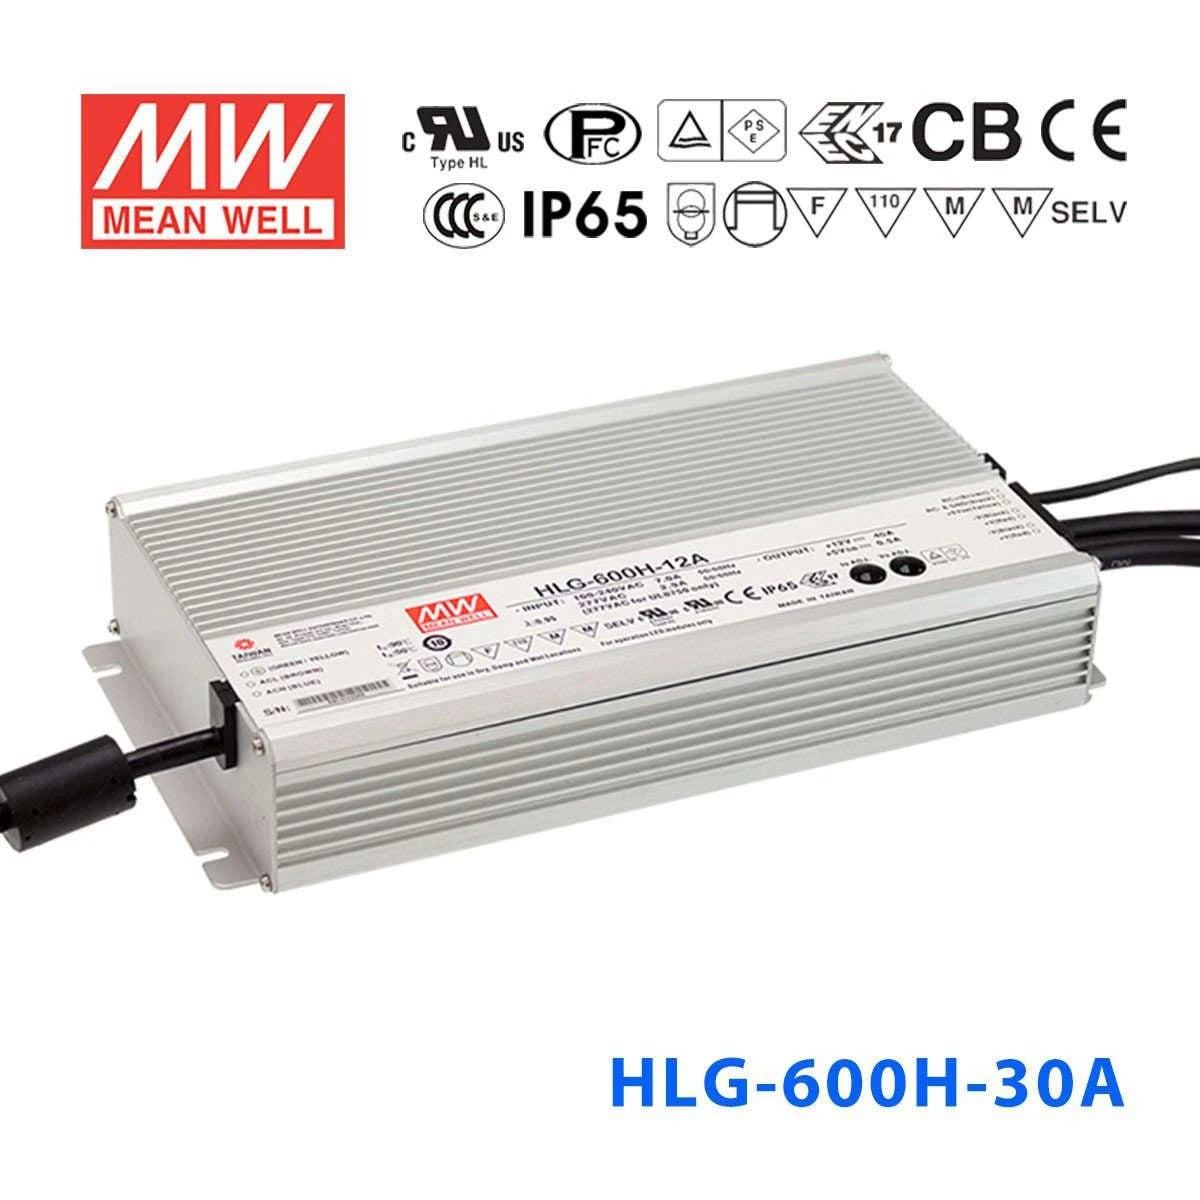 Mean Well HLG-600H-30A Power Supply 600W 30V - Adjustable